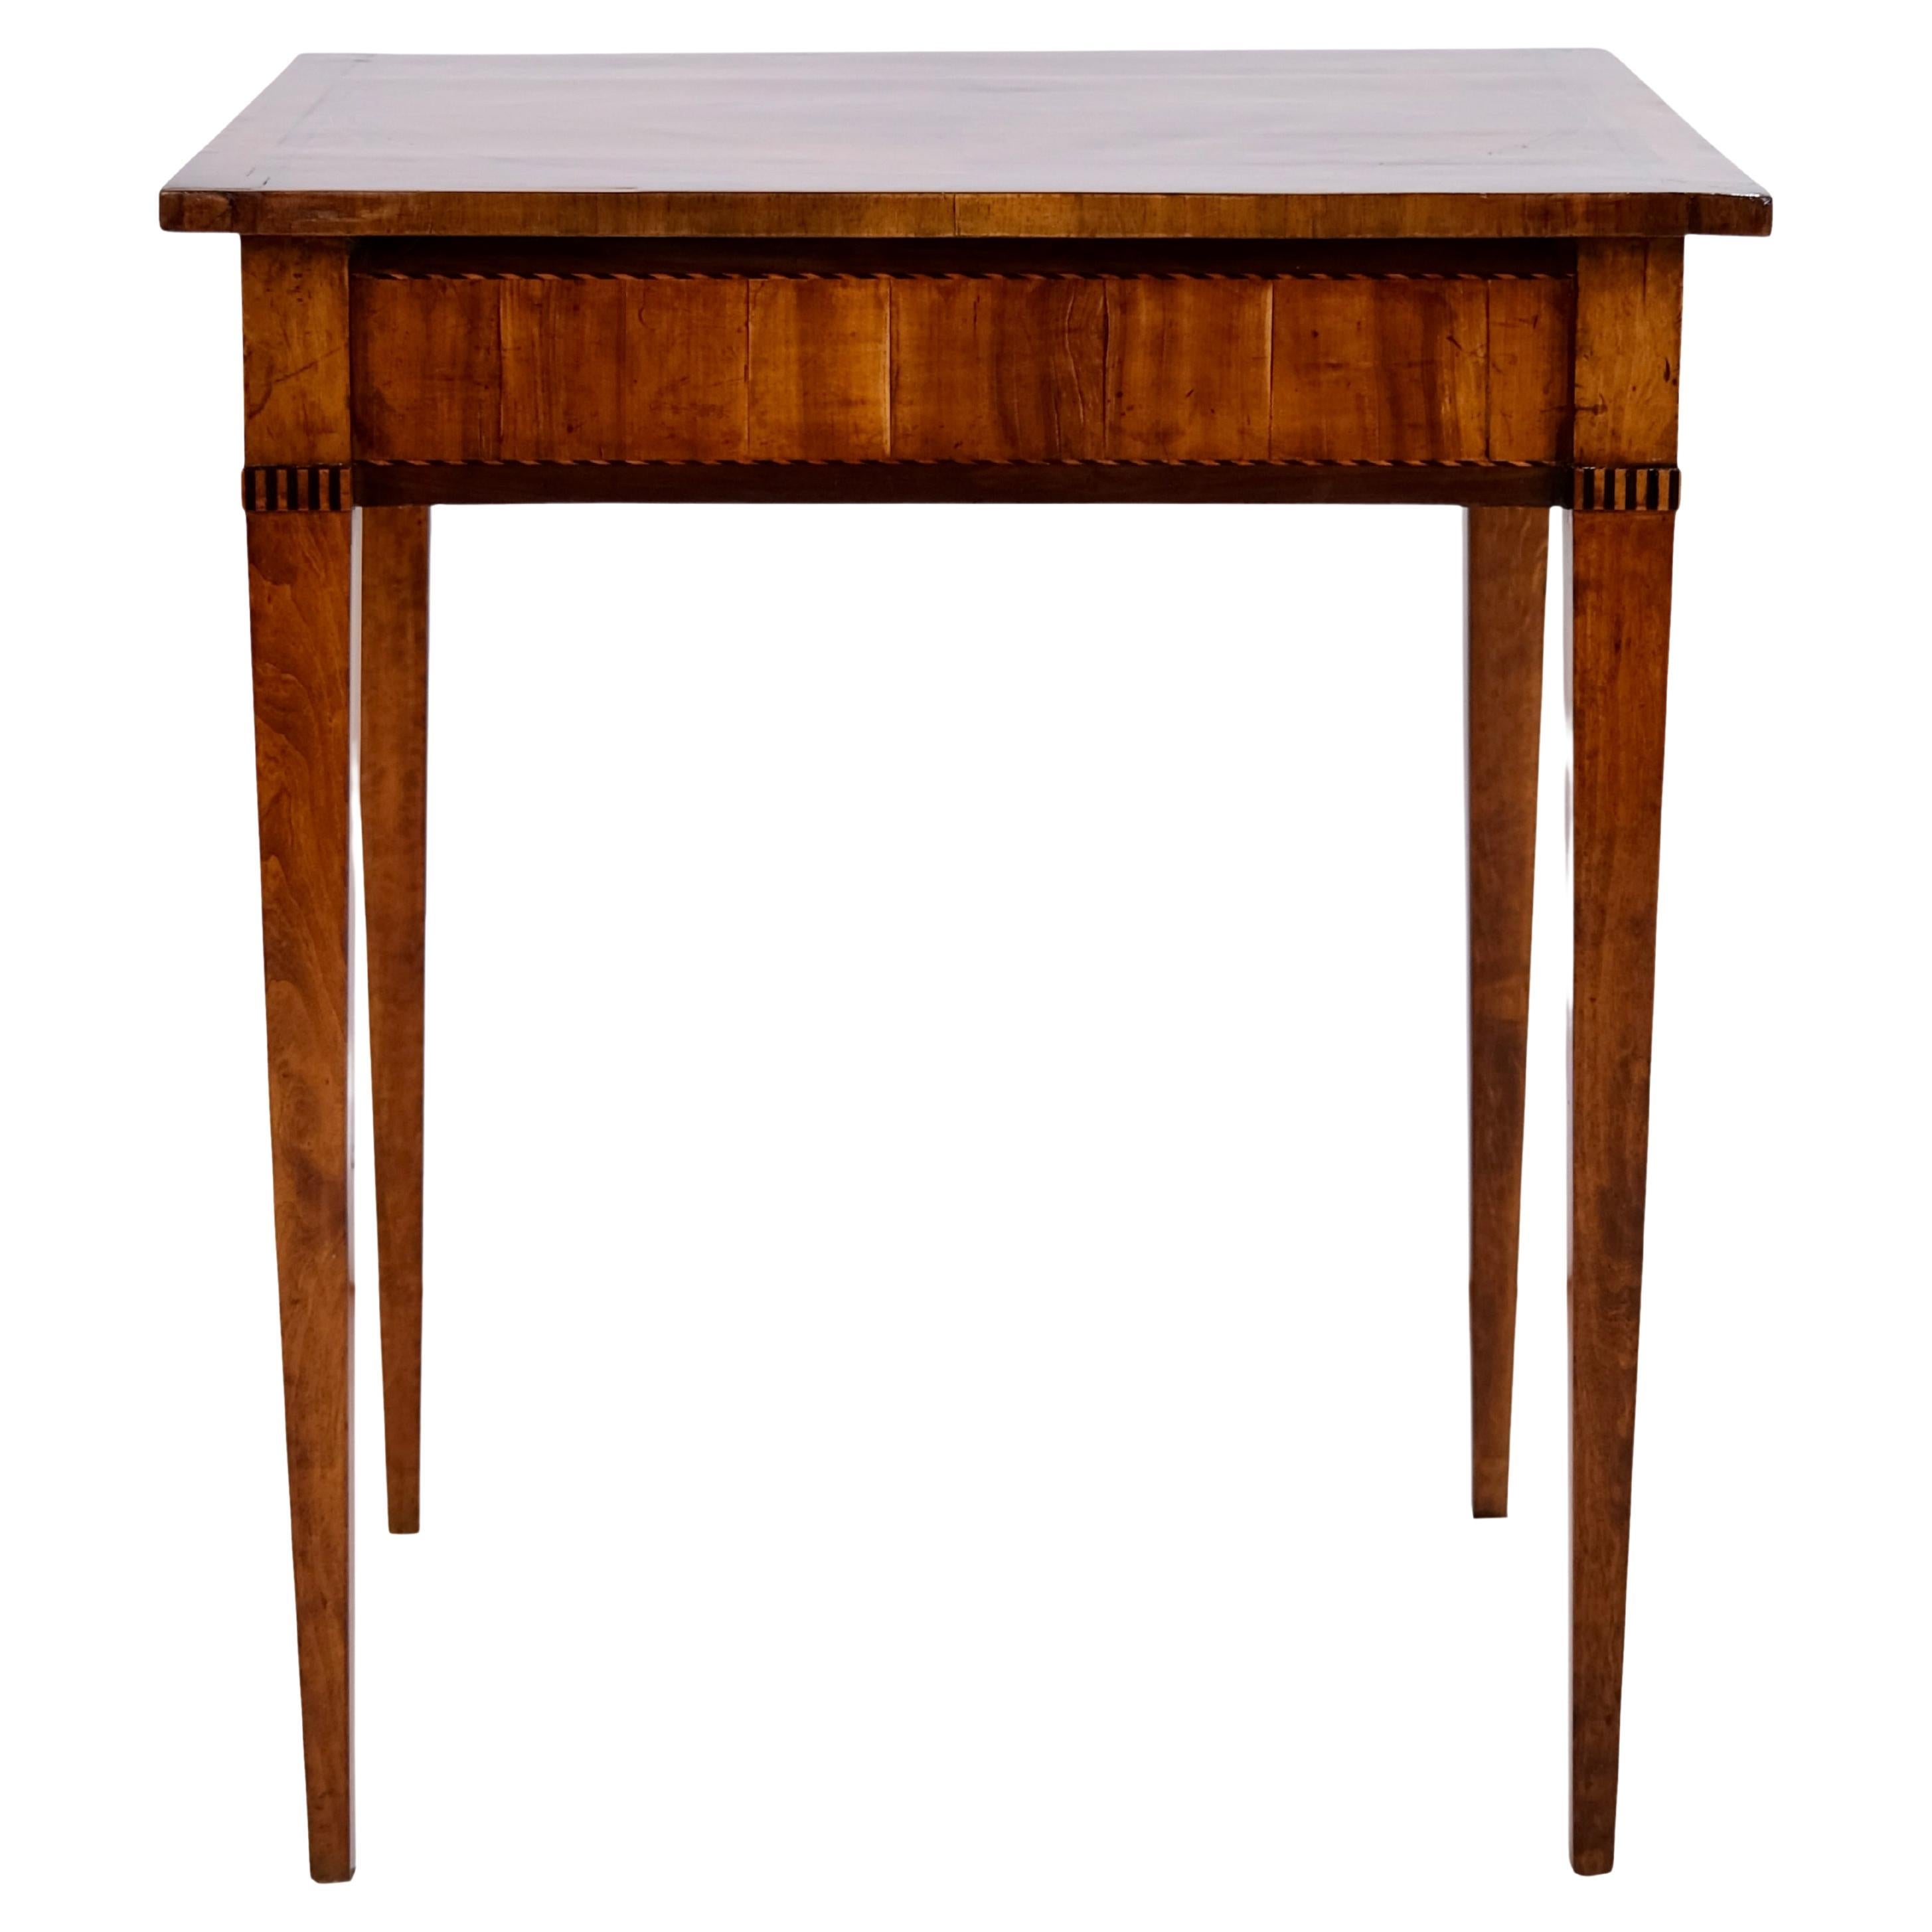 Handpolished 1780s Louis Seize XVI Side Table in Cherry Wood For Sale